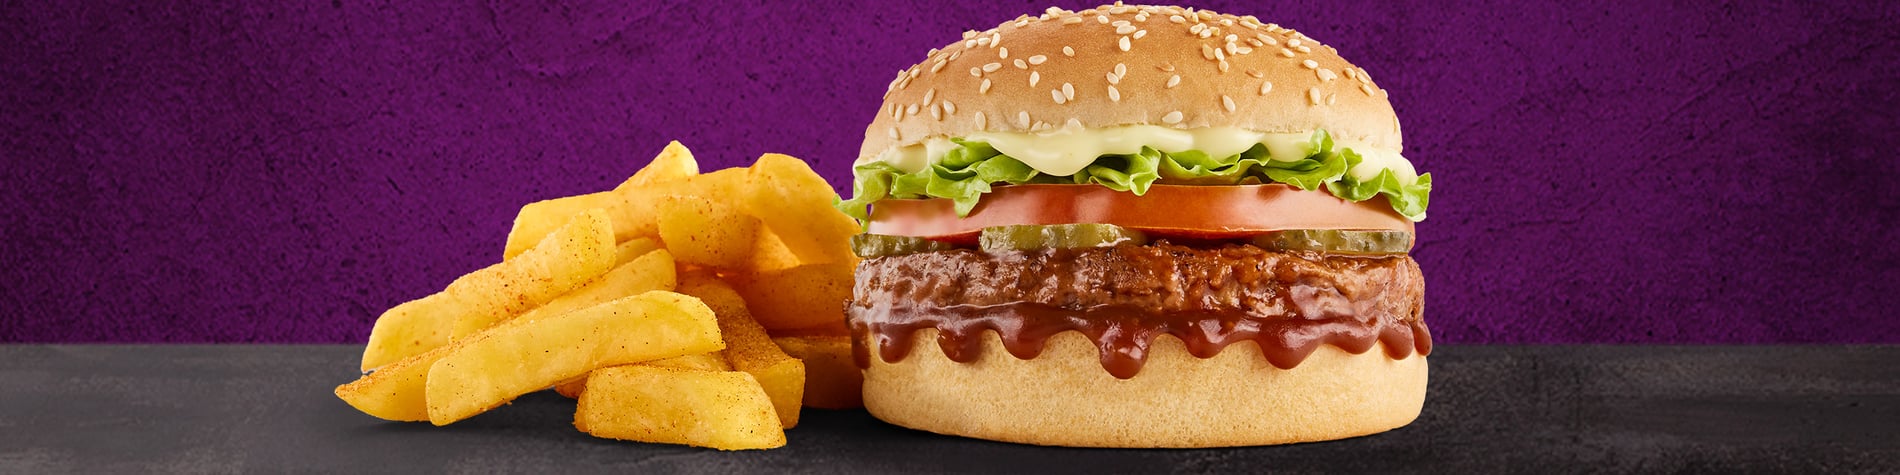 The NEW Mo’MjojoTM Burger Meal from Steers® El Ridge Square. 2 Flame-Grilled pure beef patties, pineapple, macon, tomato, lettuce, and small Famous Hand-Cut Chips, on a purple background.